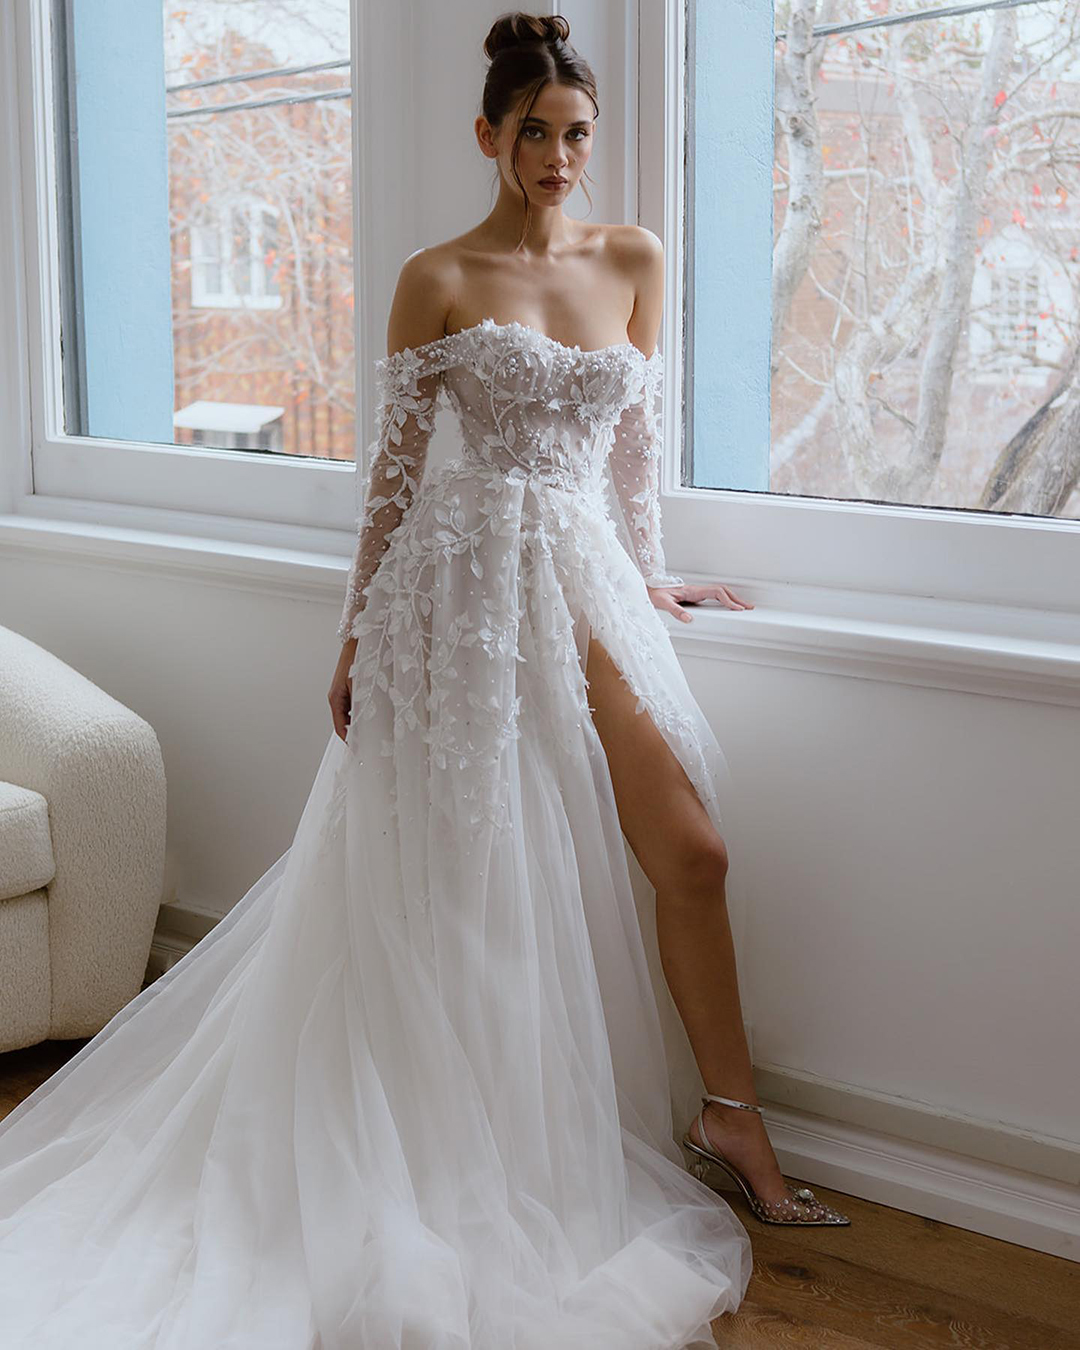 sweetheart neckline wedding dress a line with sleeves off the shoulder pallas couture